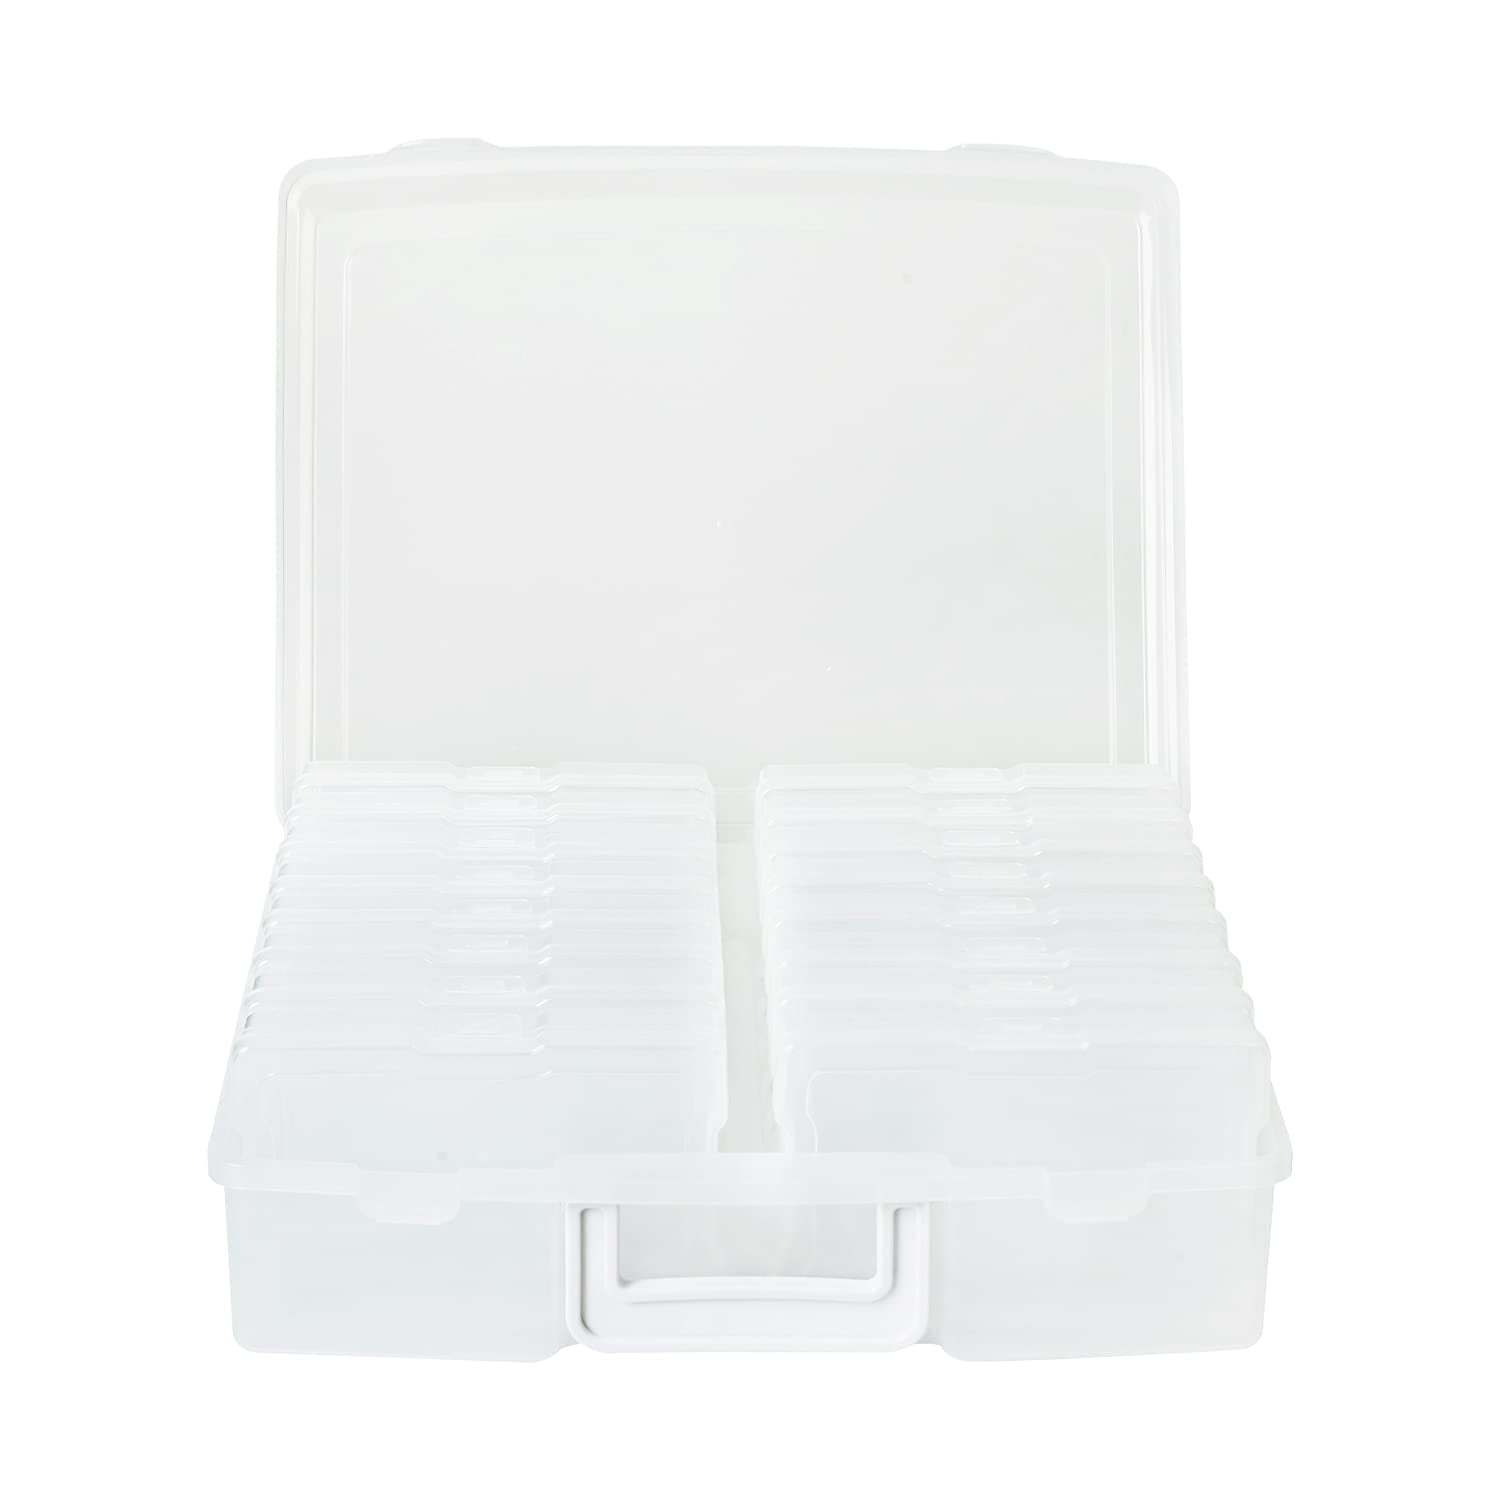 Iris® Storage Boxes With Lift-Off Lids, 26 1/10 x 17 1/2 x 11 1/4,  Clear, Case Of 5